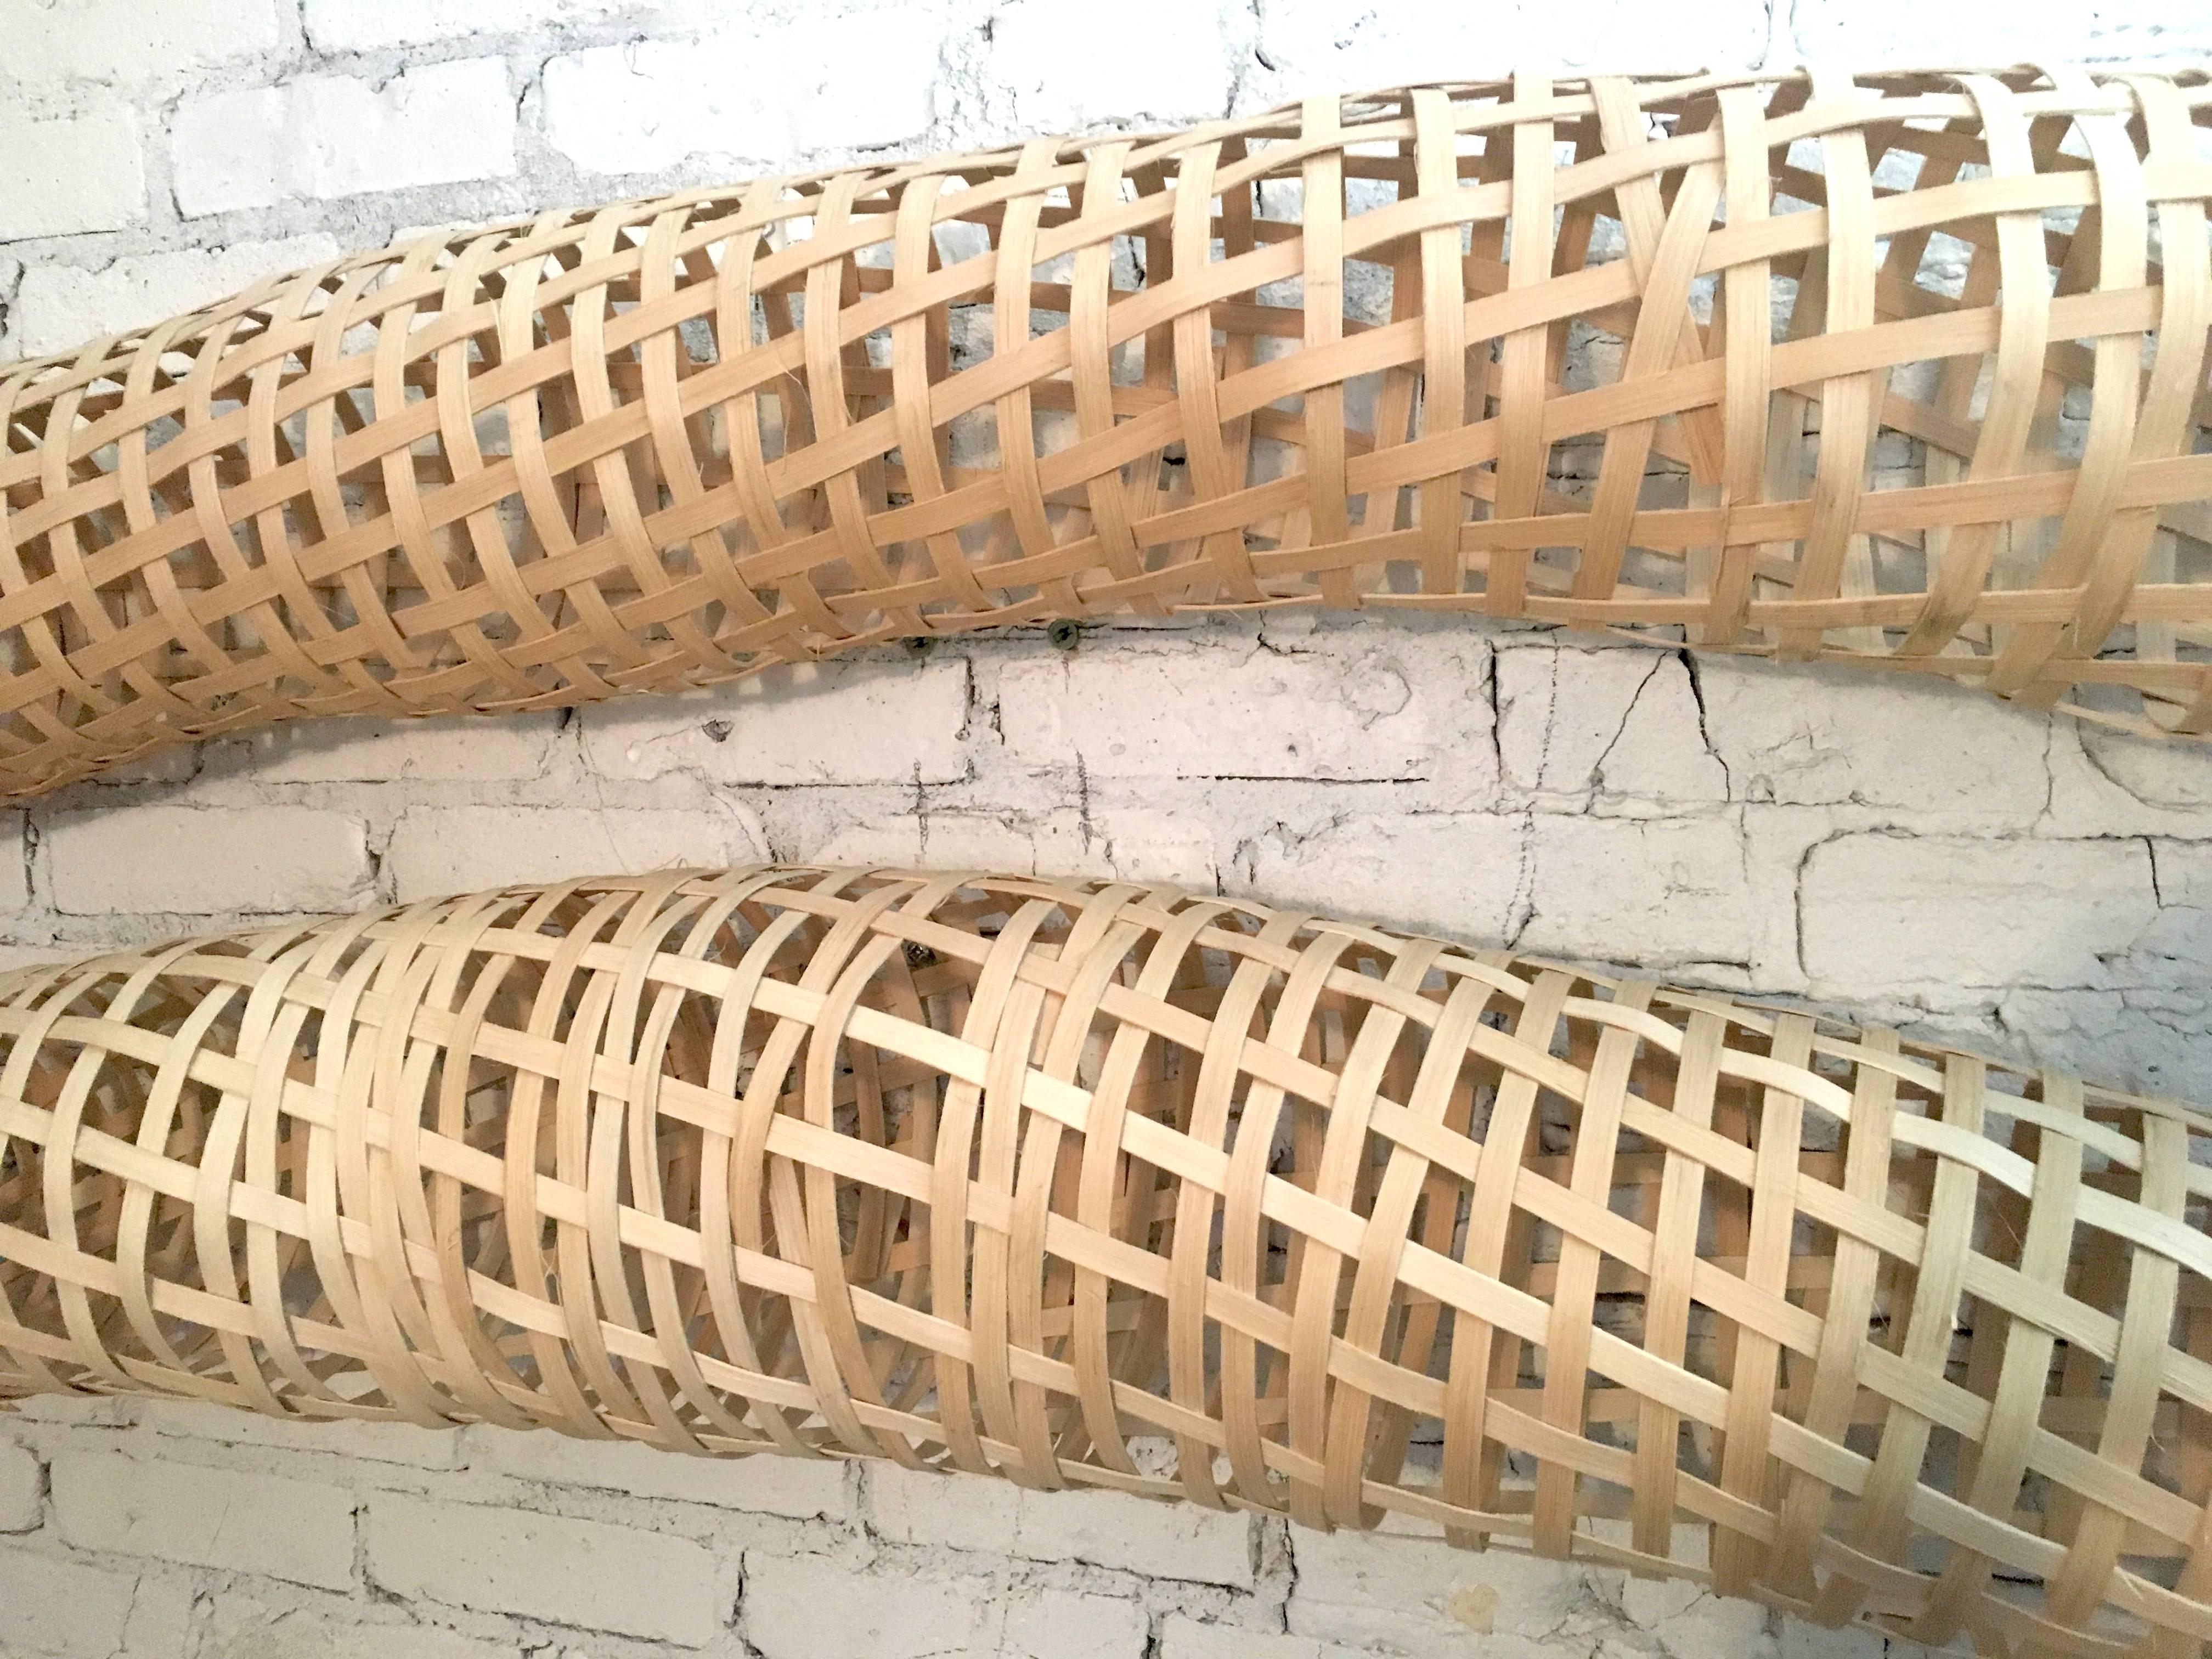 21st century woven oak sculptures by Analee Soskin
can be hung vertically, horizontally or laid on a table.